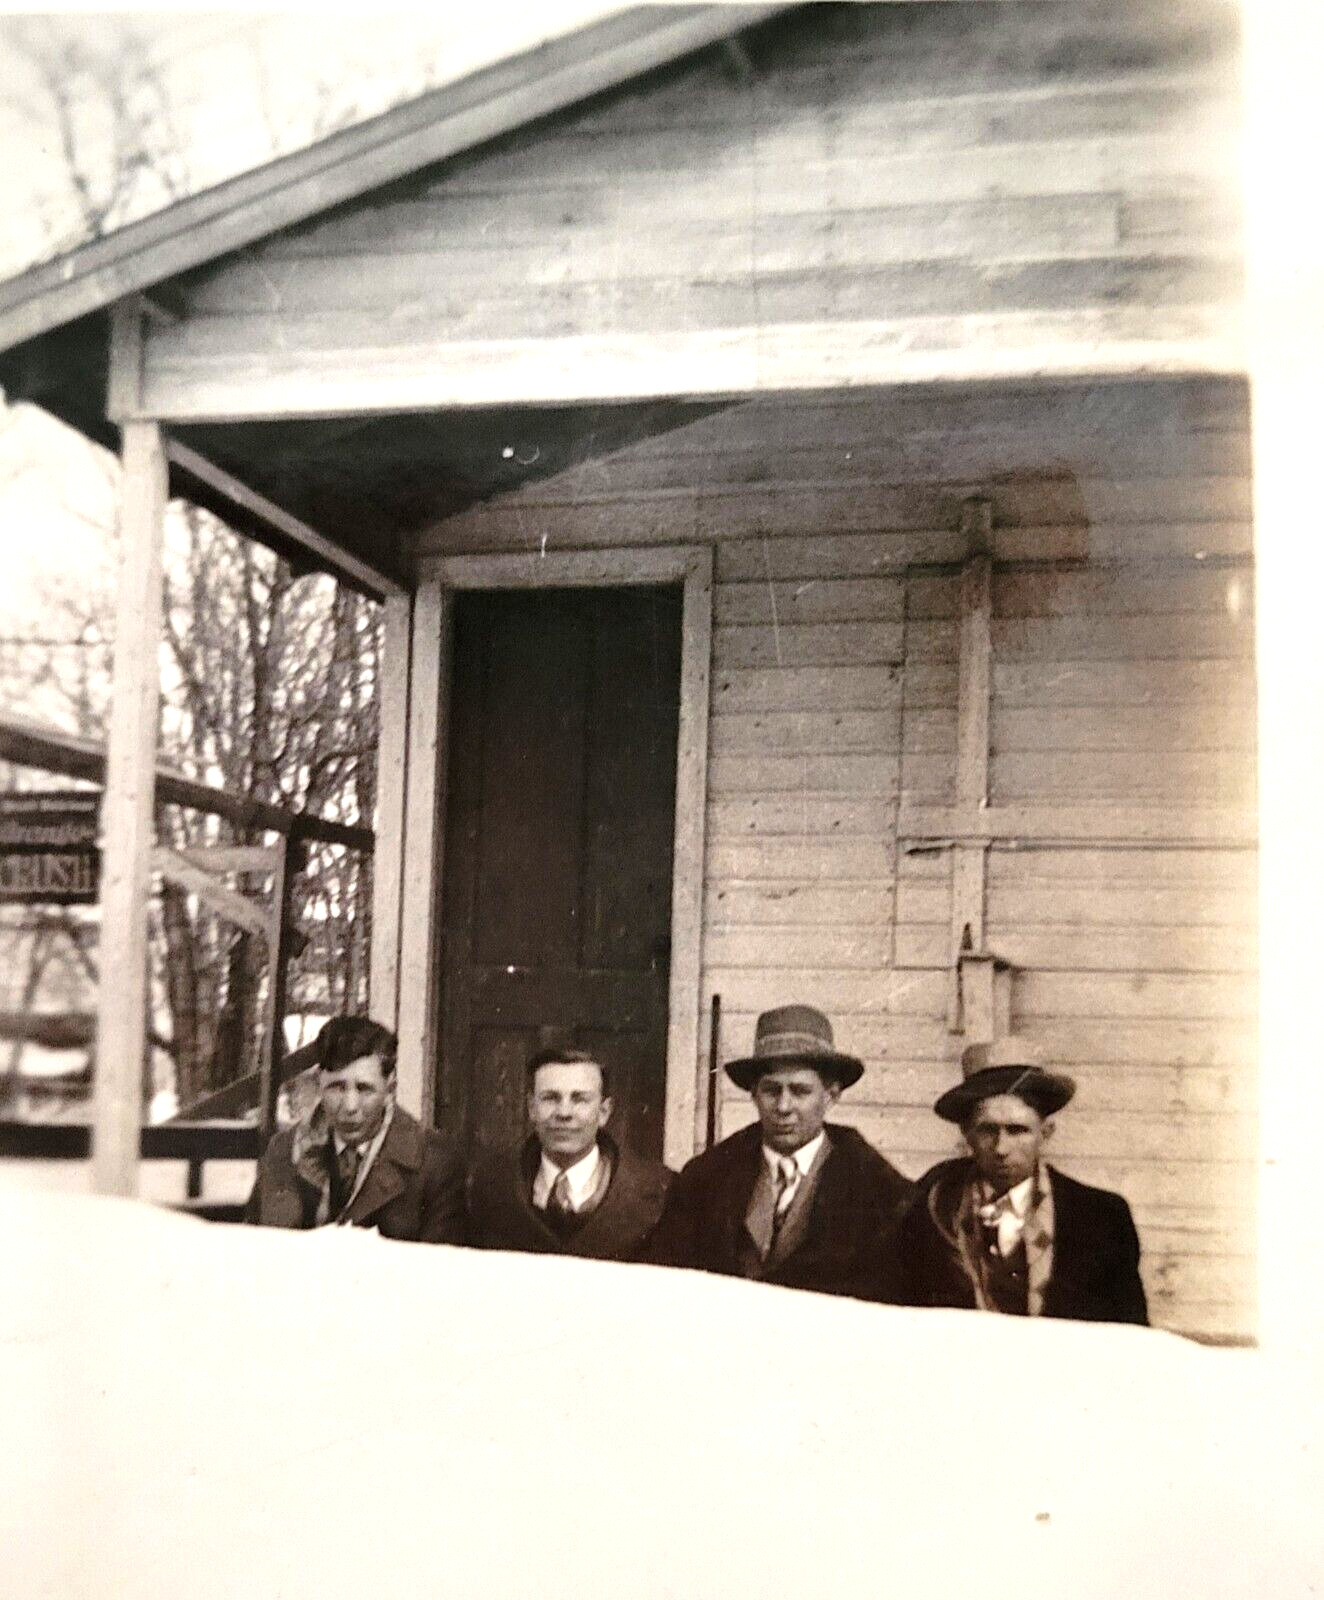 c1920s Men Snowed in on the Porch of Their Home Fedora Hats Original Photo